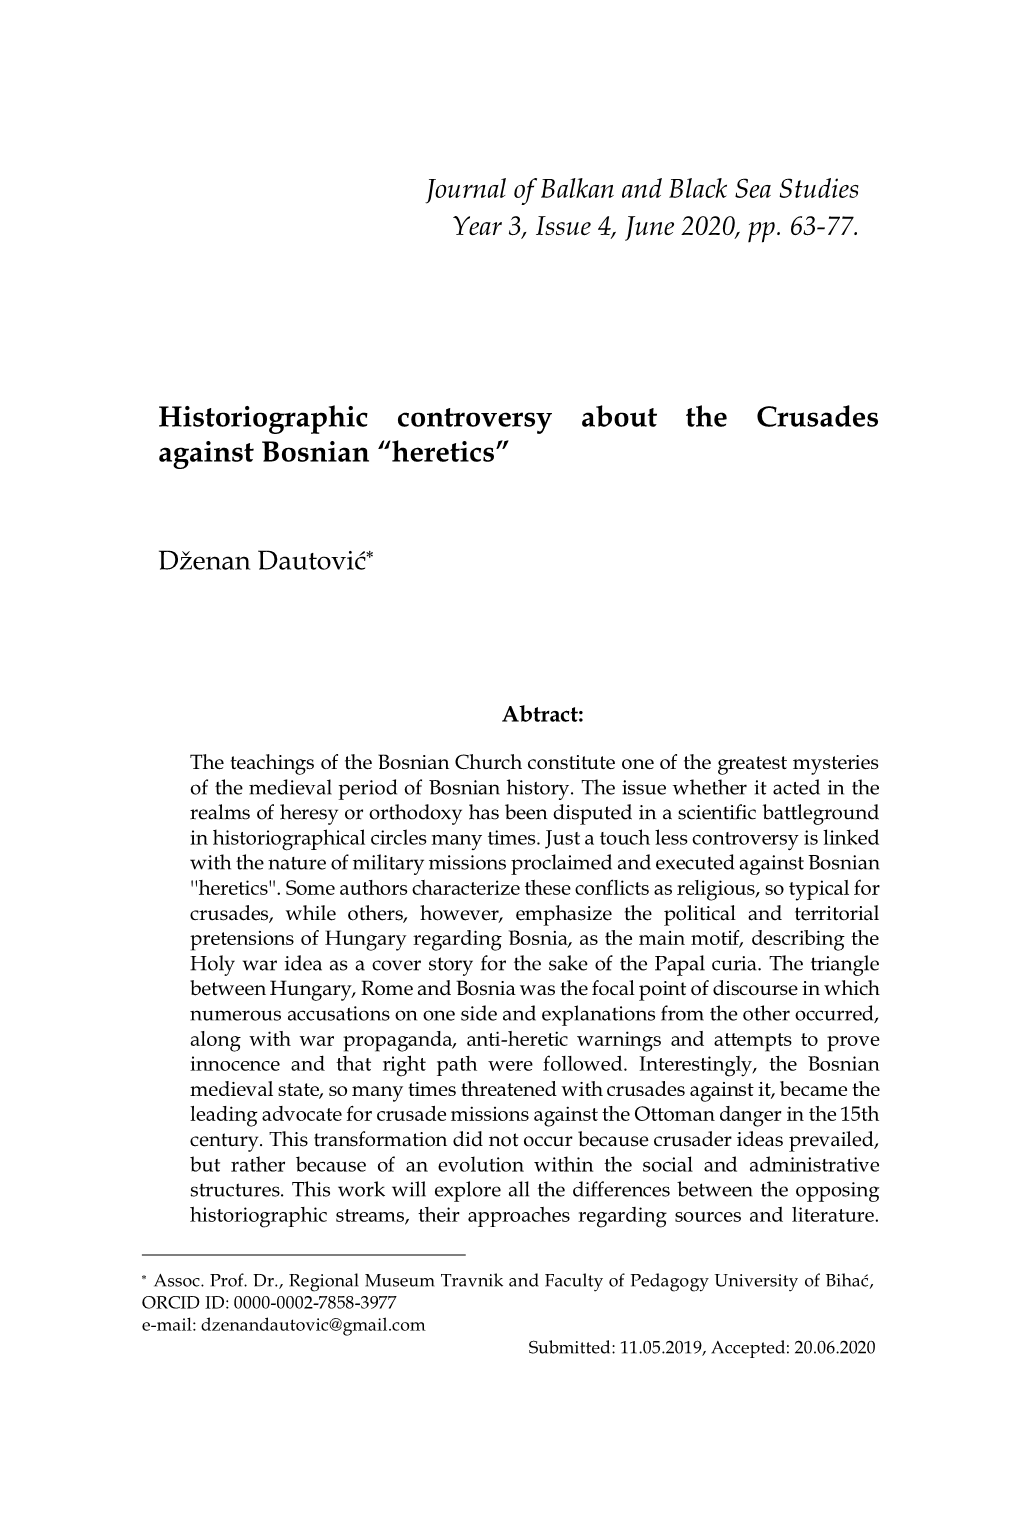 Historiographic Controversy About the Crusades Against Bosnian “Heretics”